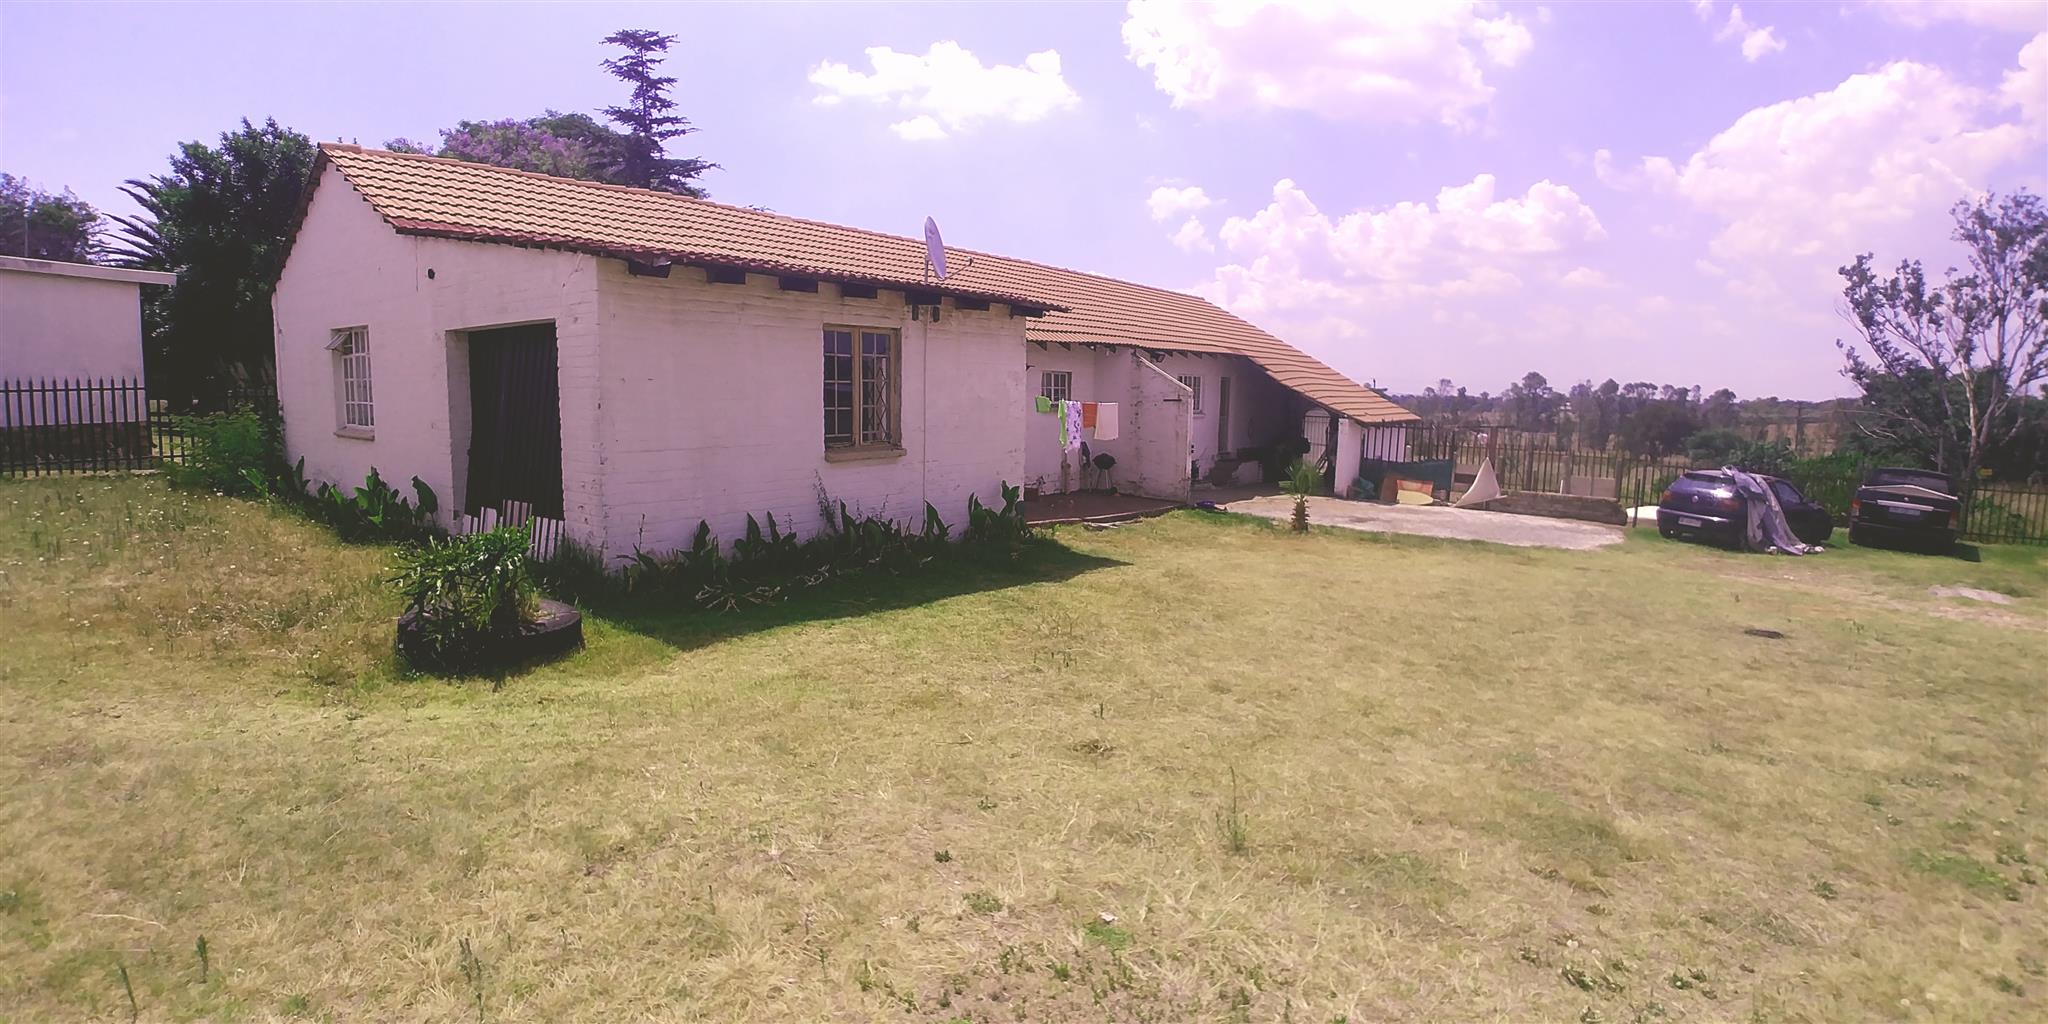 For Rent Cottages 2 Bedrooms Midrand Listings And Prices Waa2